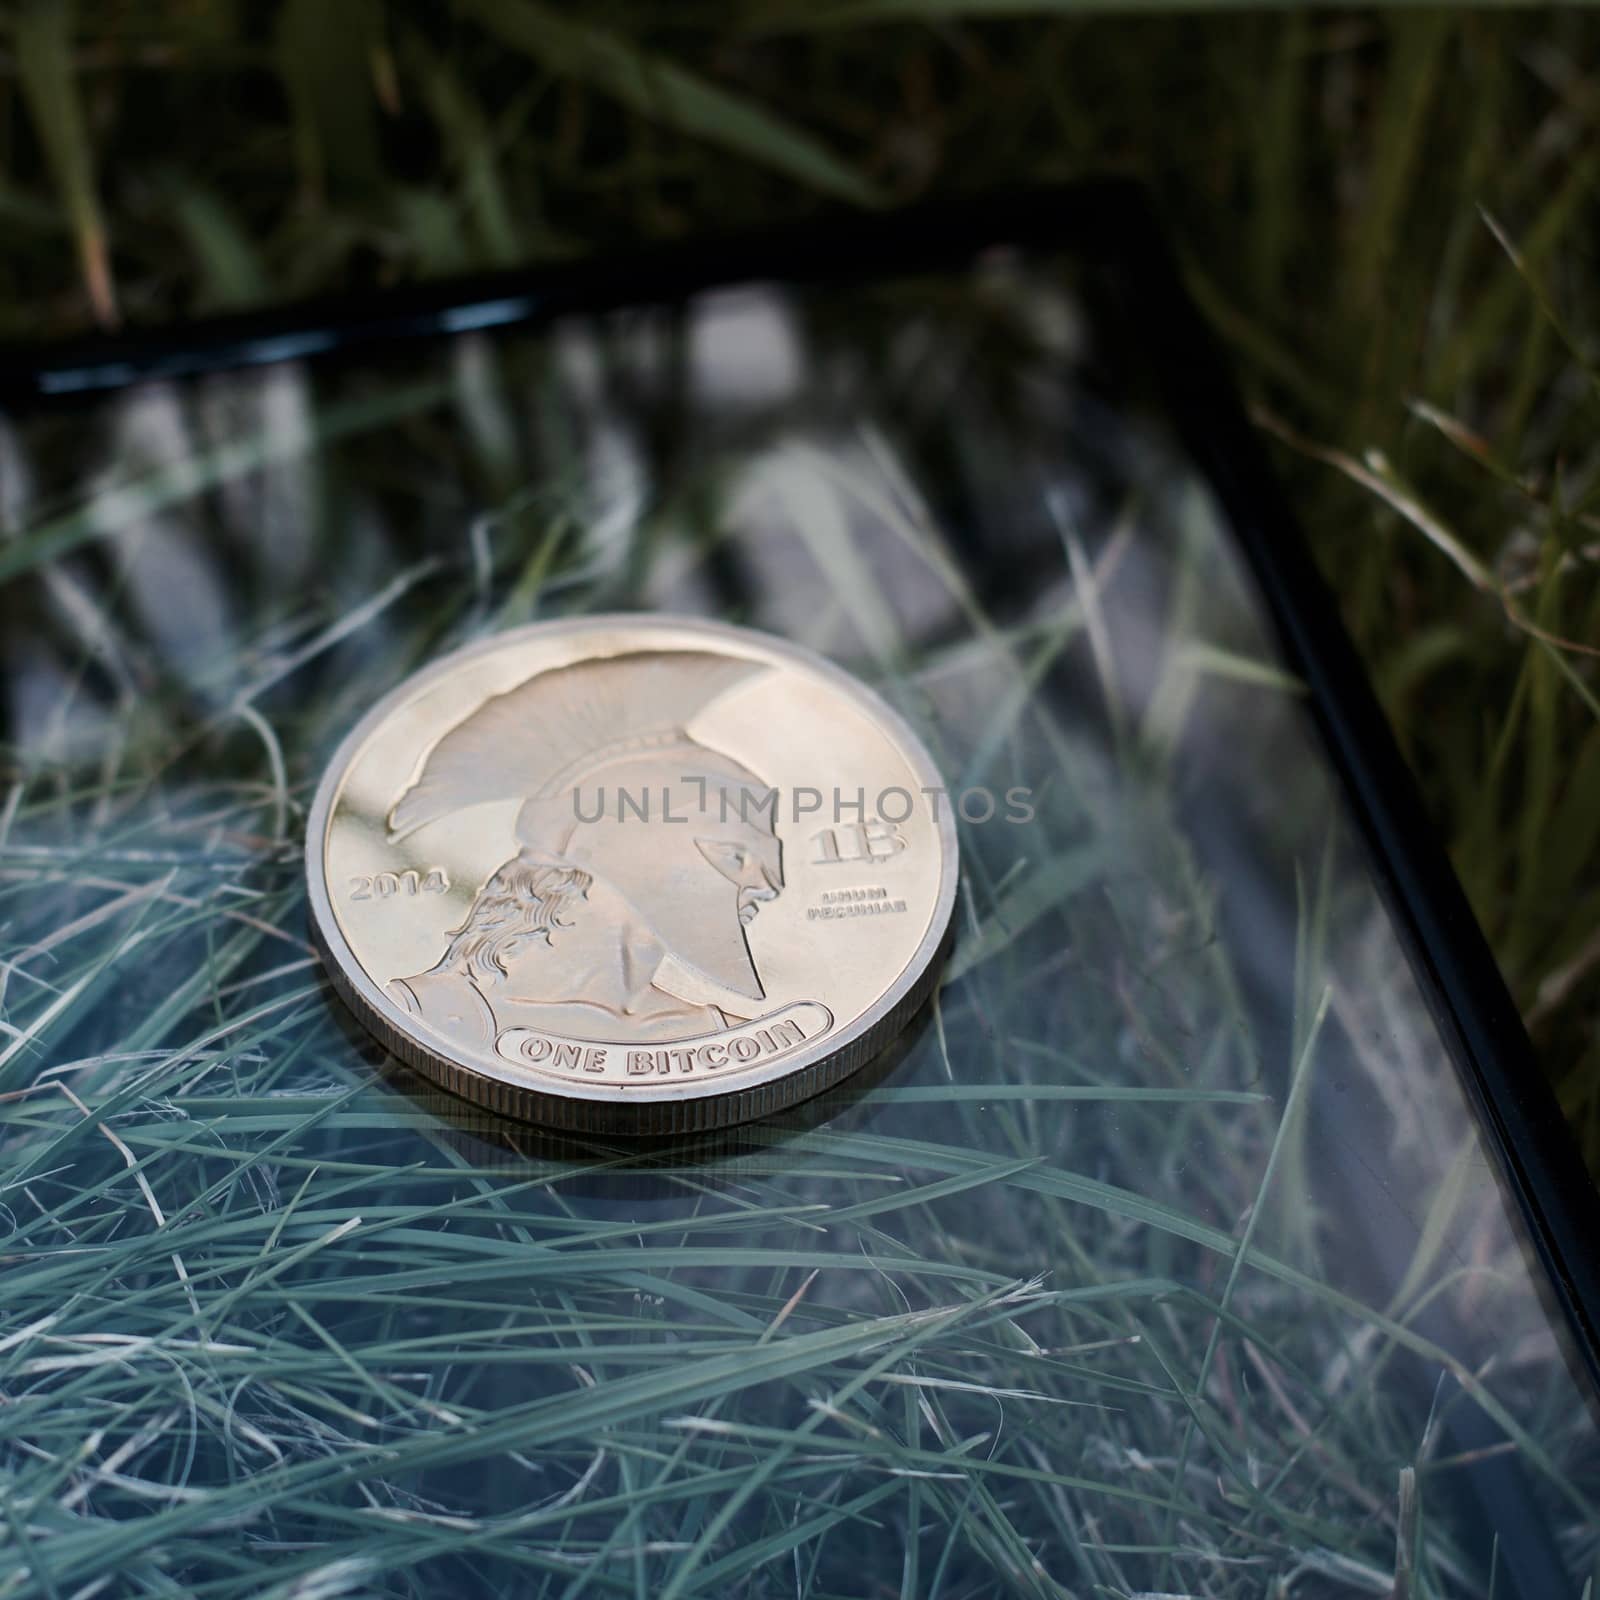 Digital currency physical metal bitcoin coin. Virtual money concept.